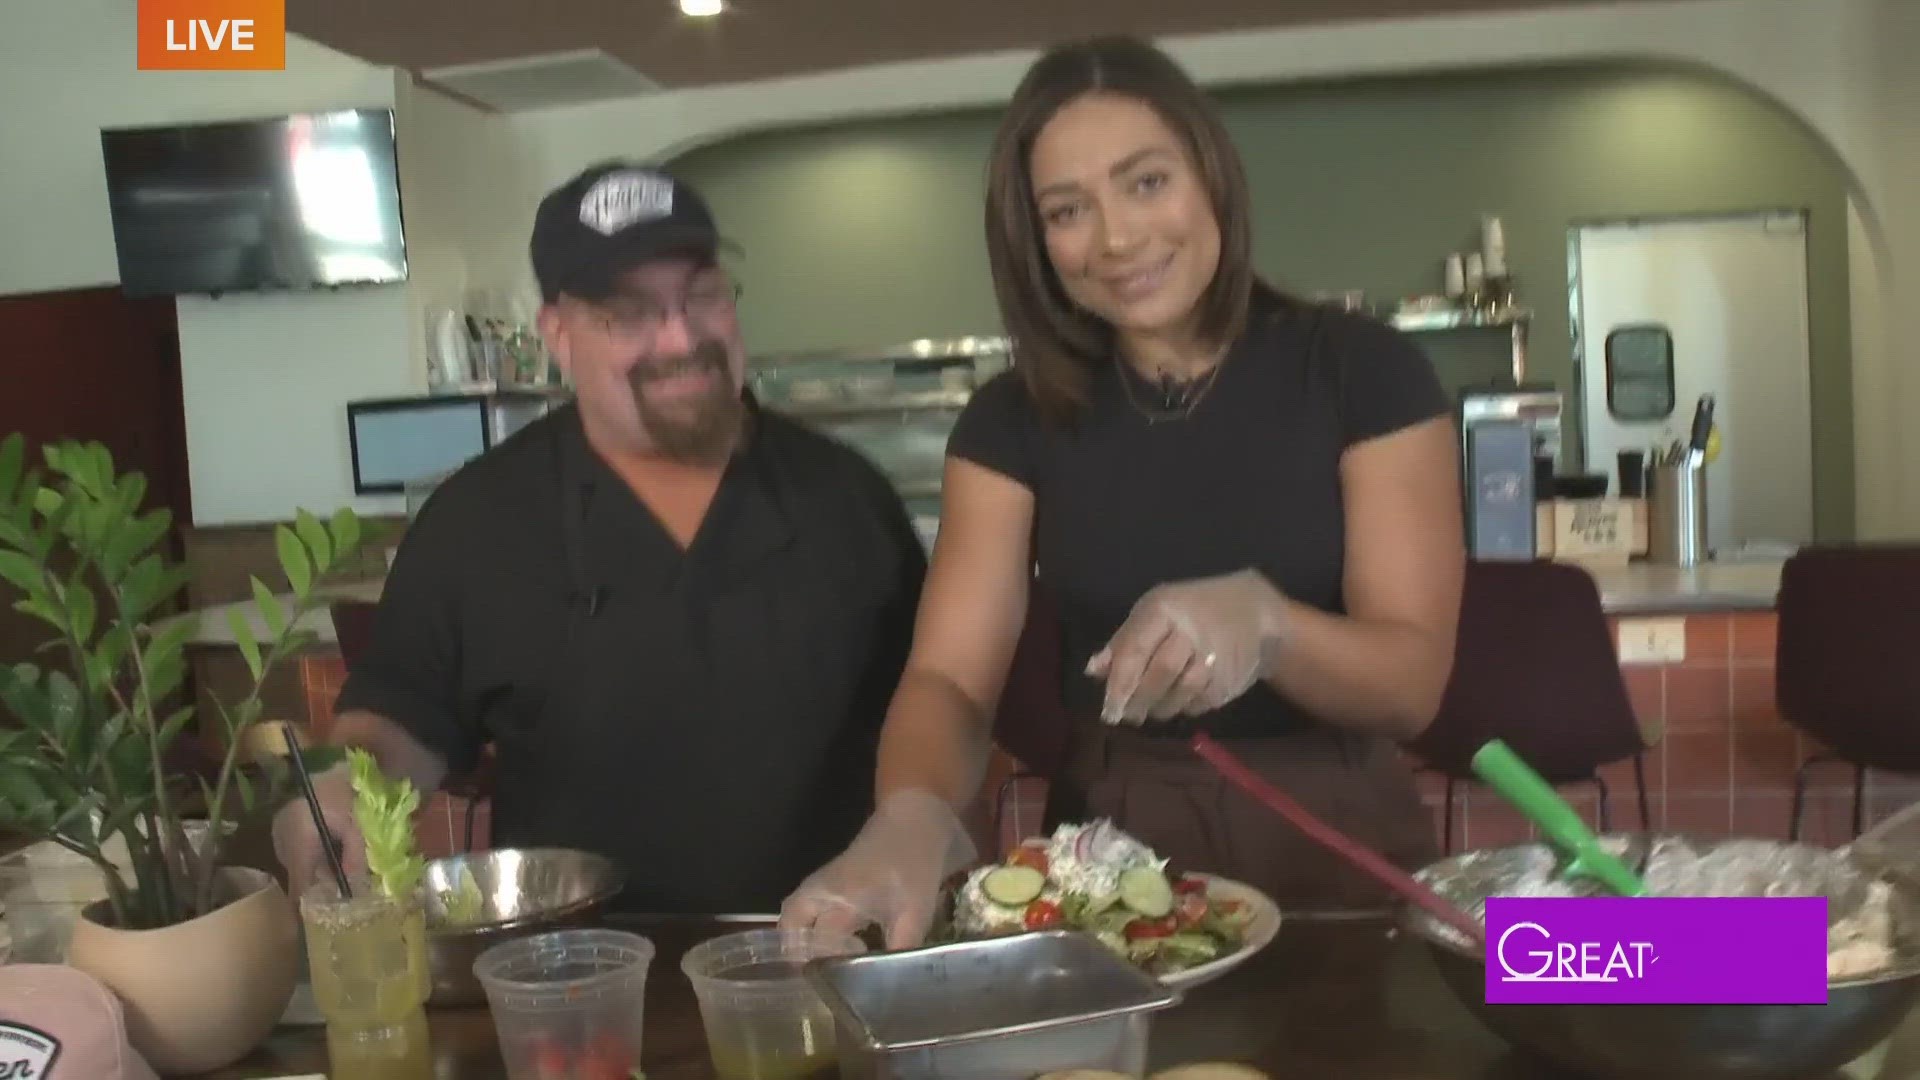 Clarke visits The Hayden at their new location to help whip up a refreshing seafood salad.